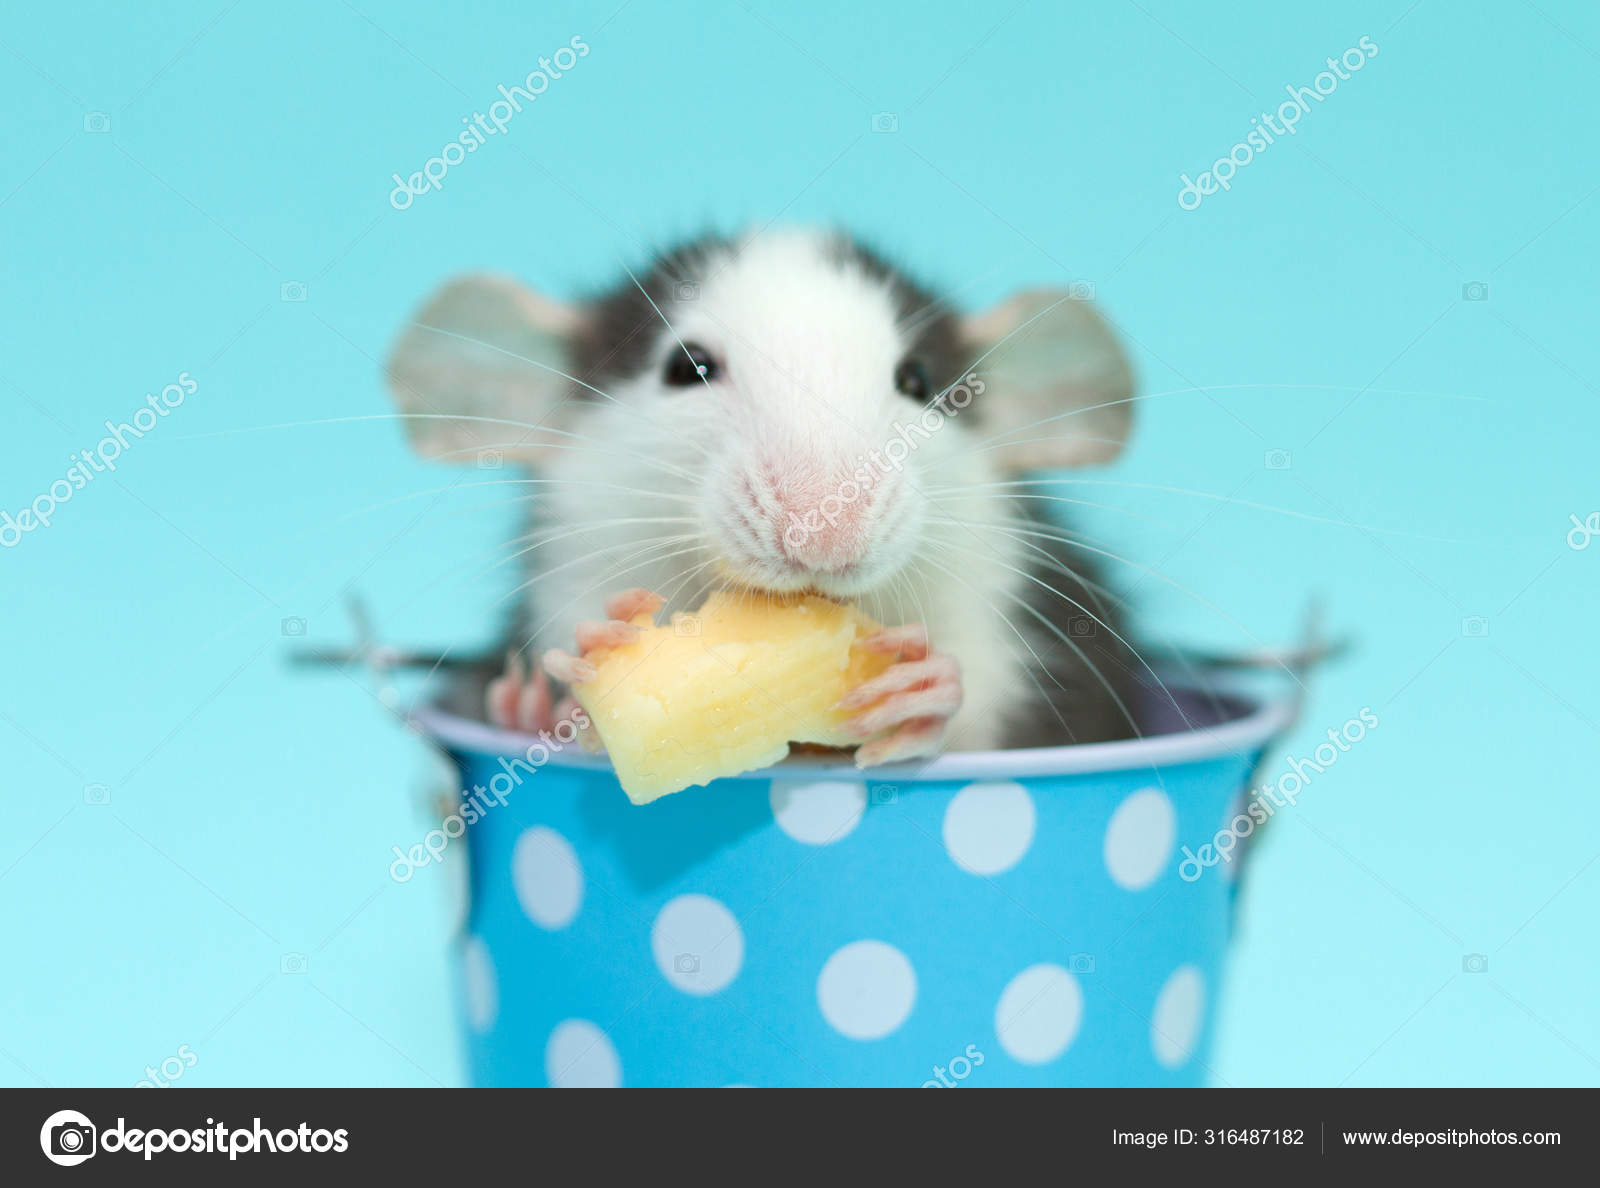 Cute Rat Blue Small Bucket Eating Cheese Stock Photo by ©fotka ...